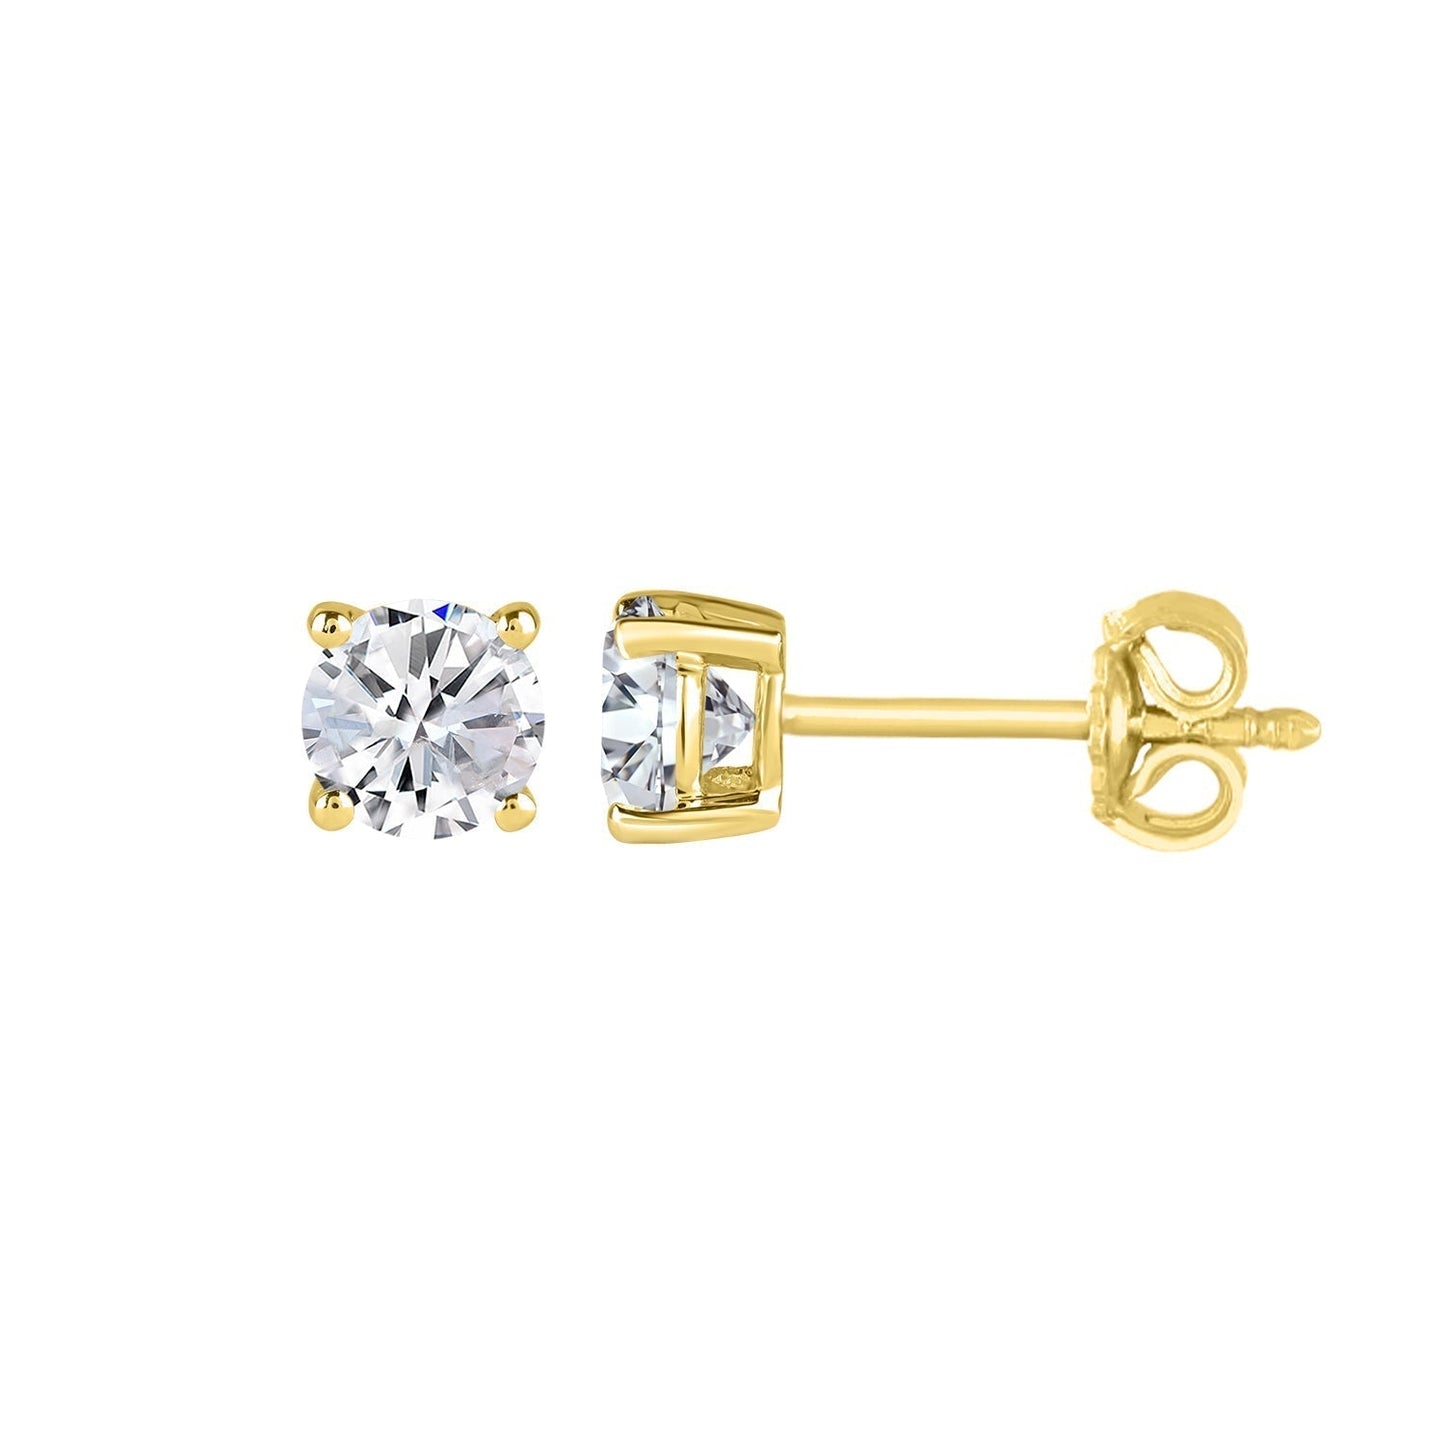 0.75 Carat Solitaire Stud Earrings with Friction Back in 14K Gold